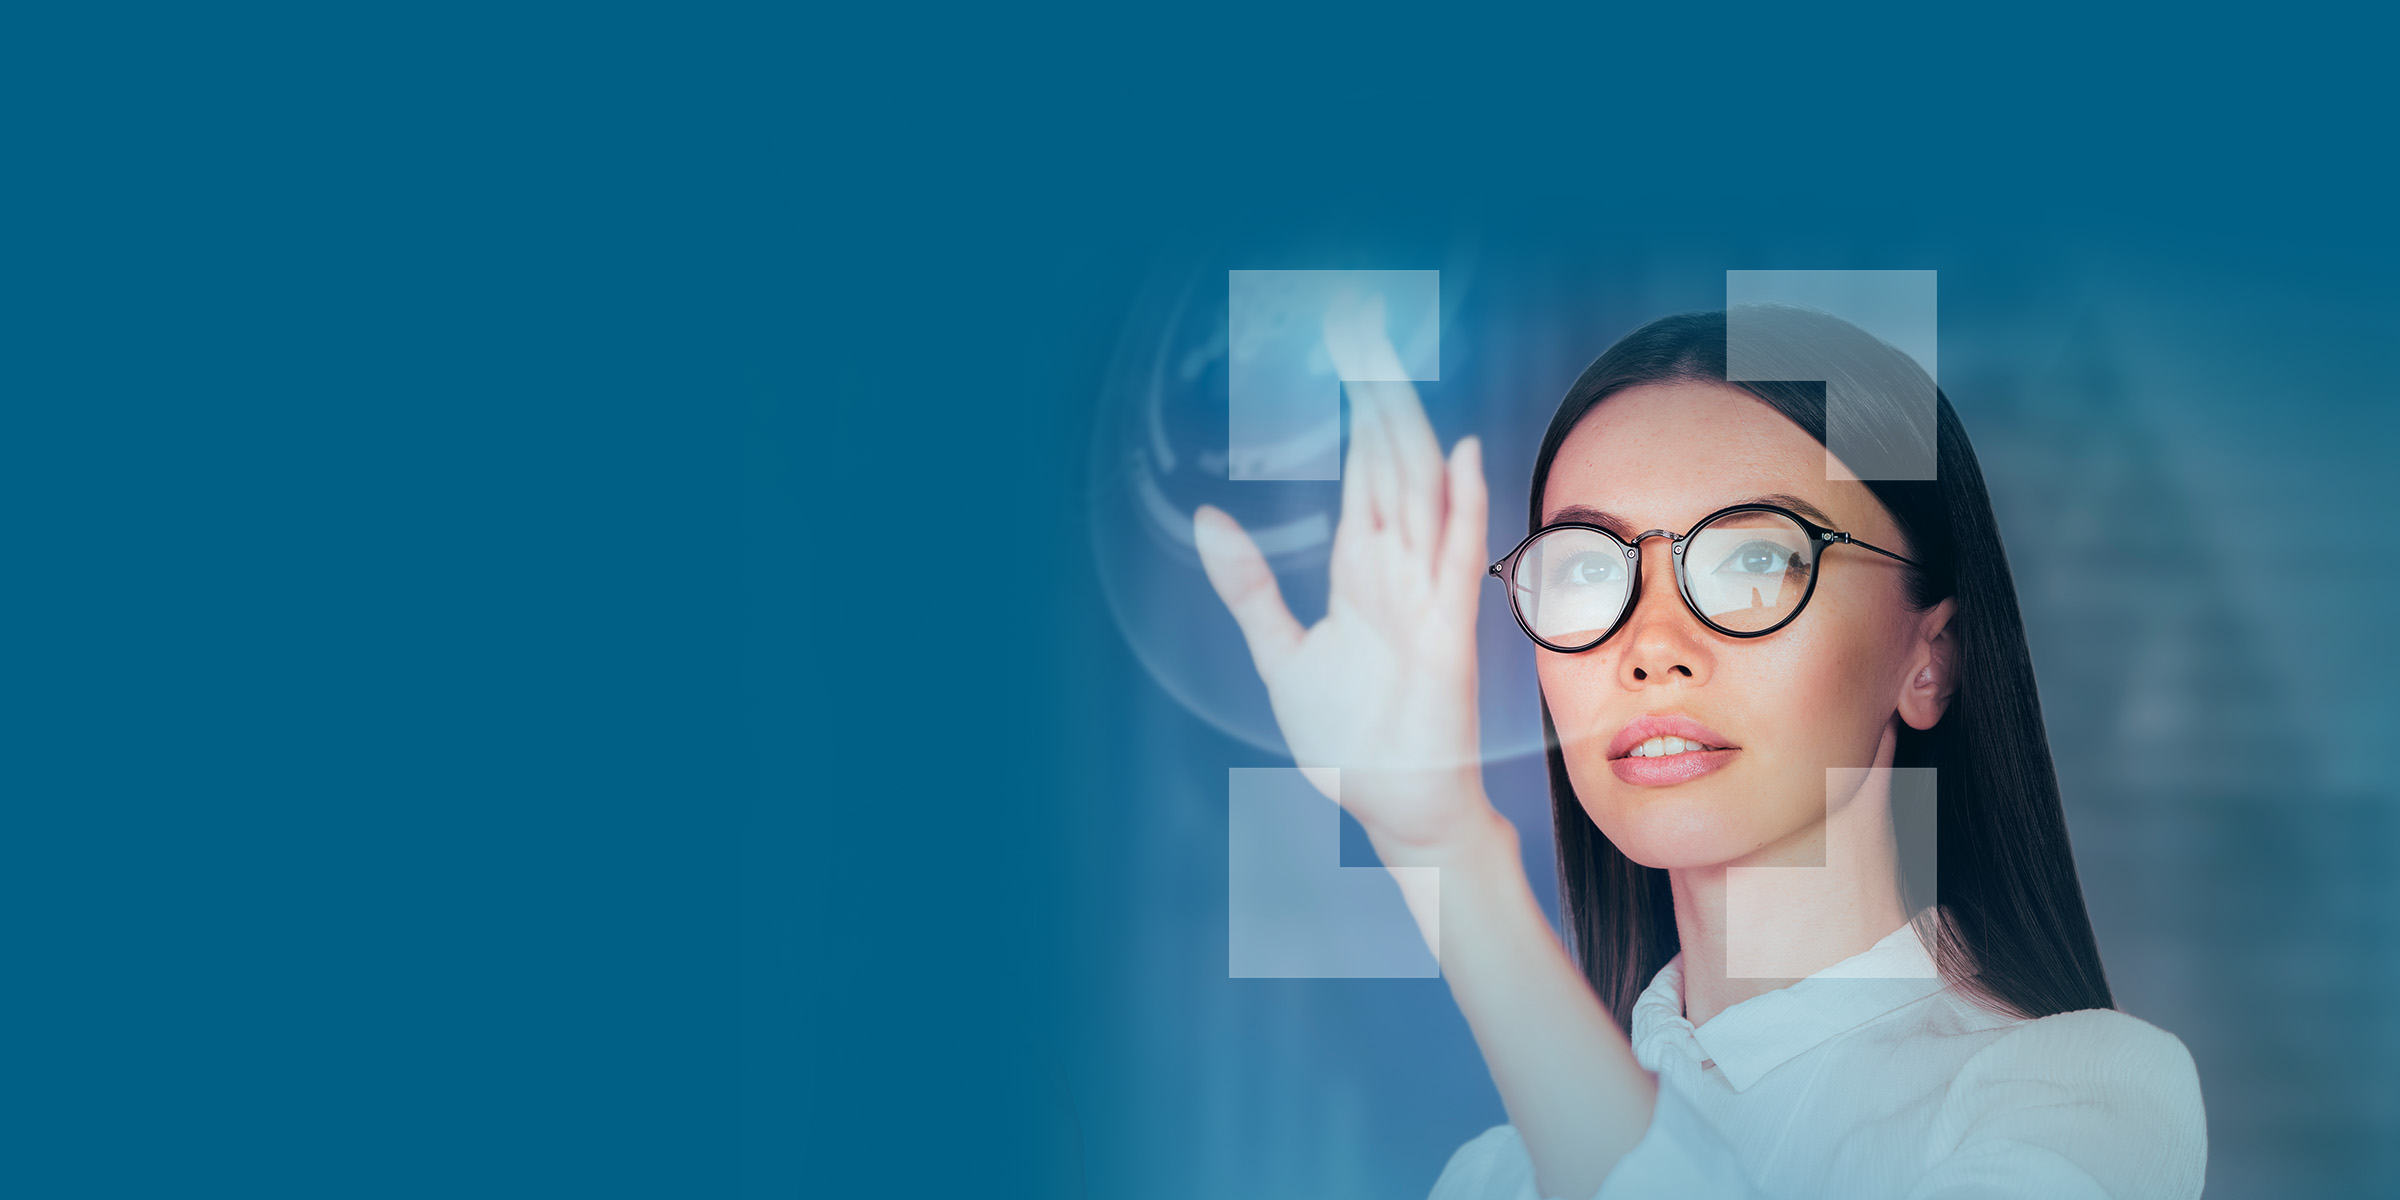 Woman with glasses reaching up to touch visual data and Qlarant viewfinder